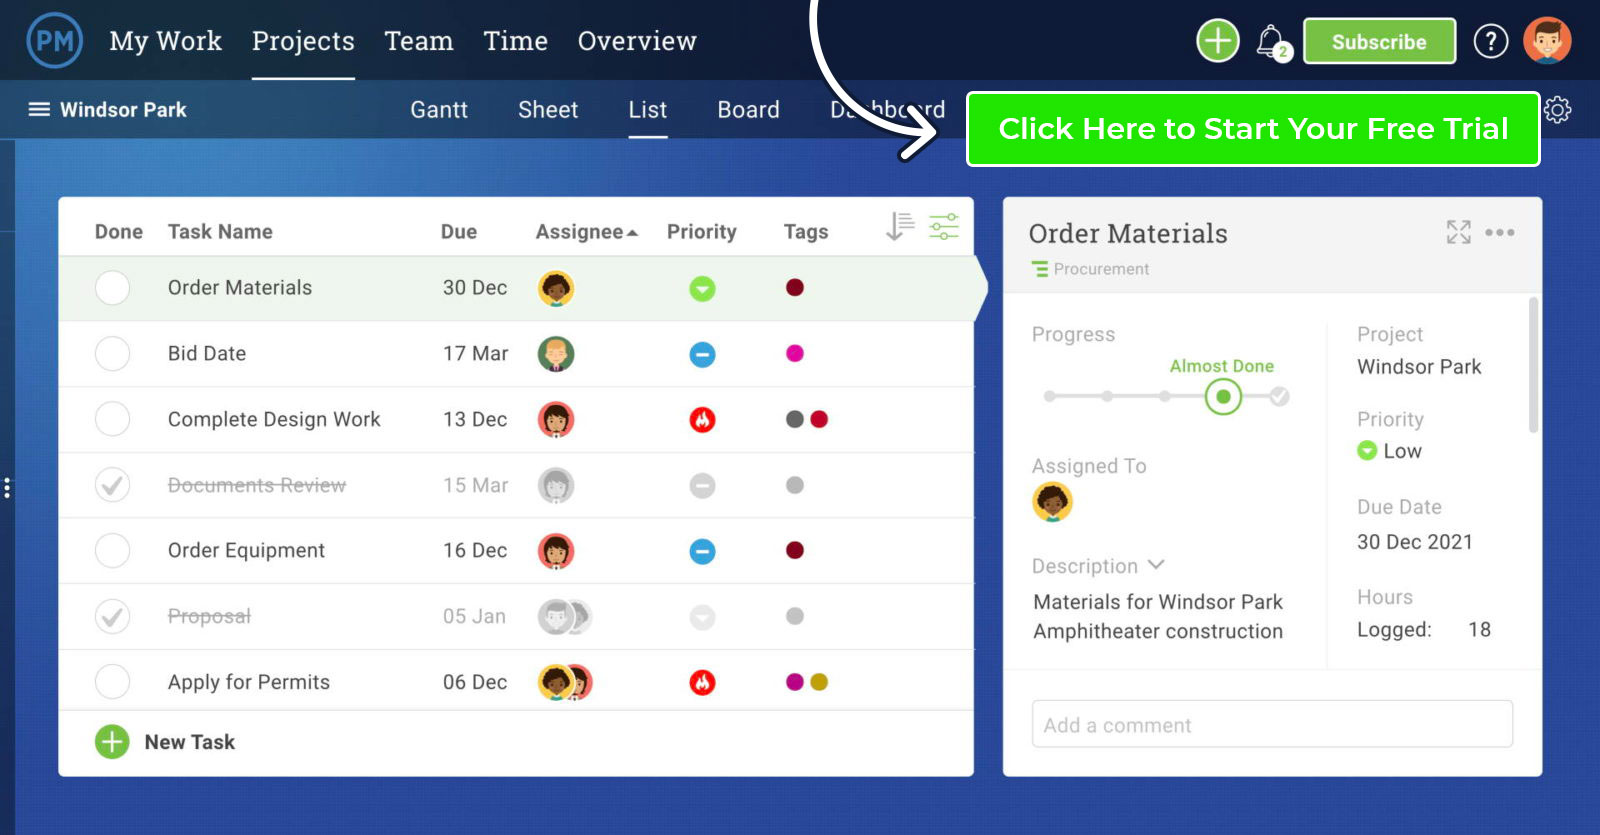 ProjectManager list view of tasks, deadlines, priorities and more